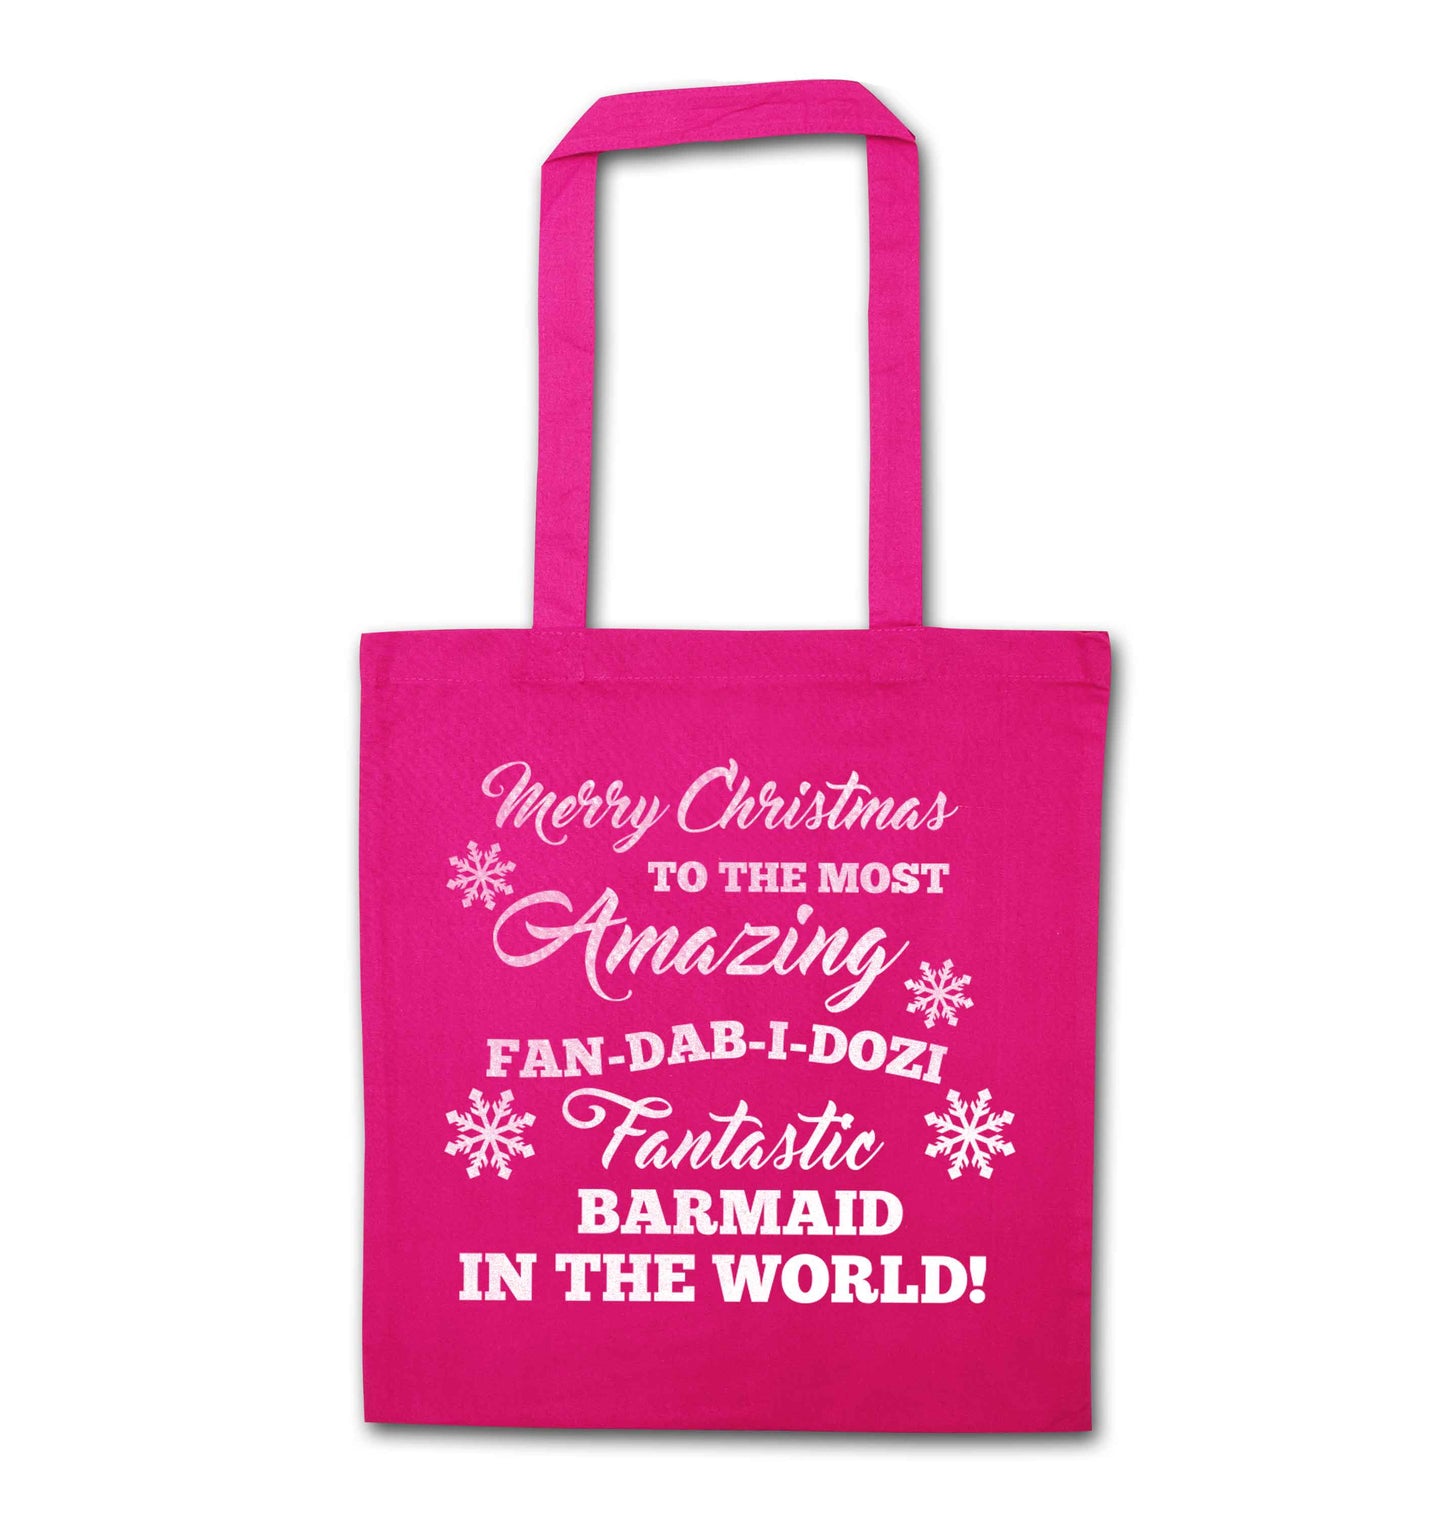 Merry Christmas to the most amazing barmaid in the world! pink tote bag